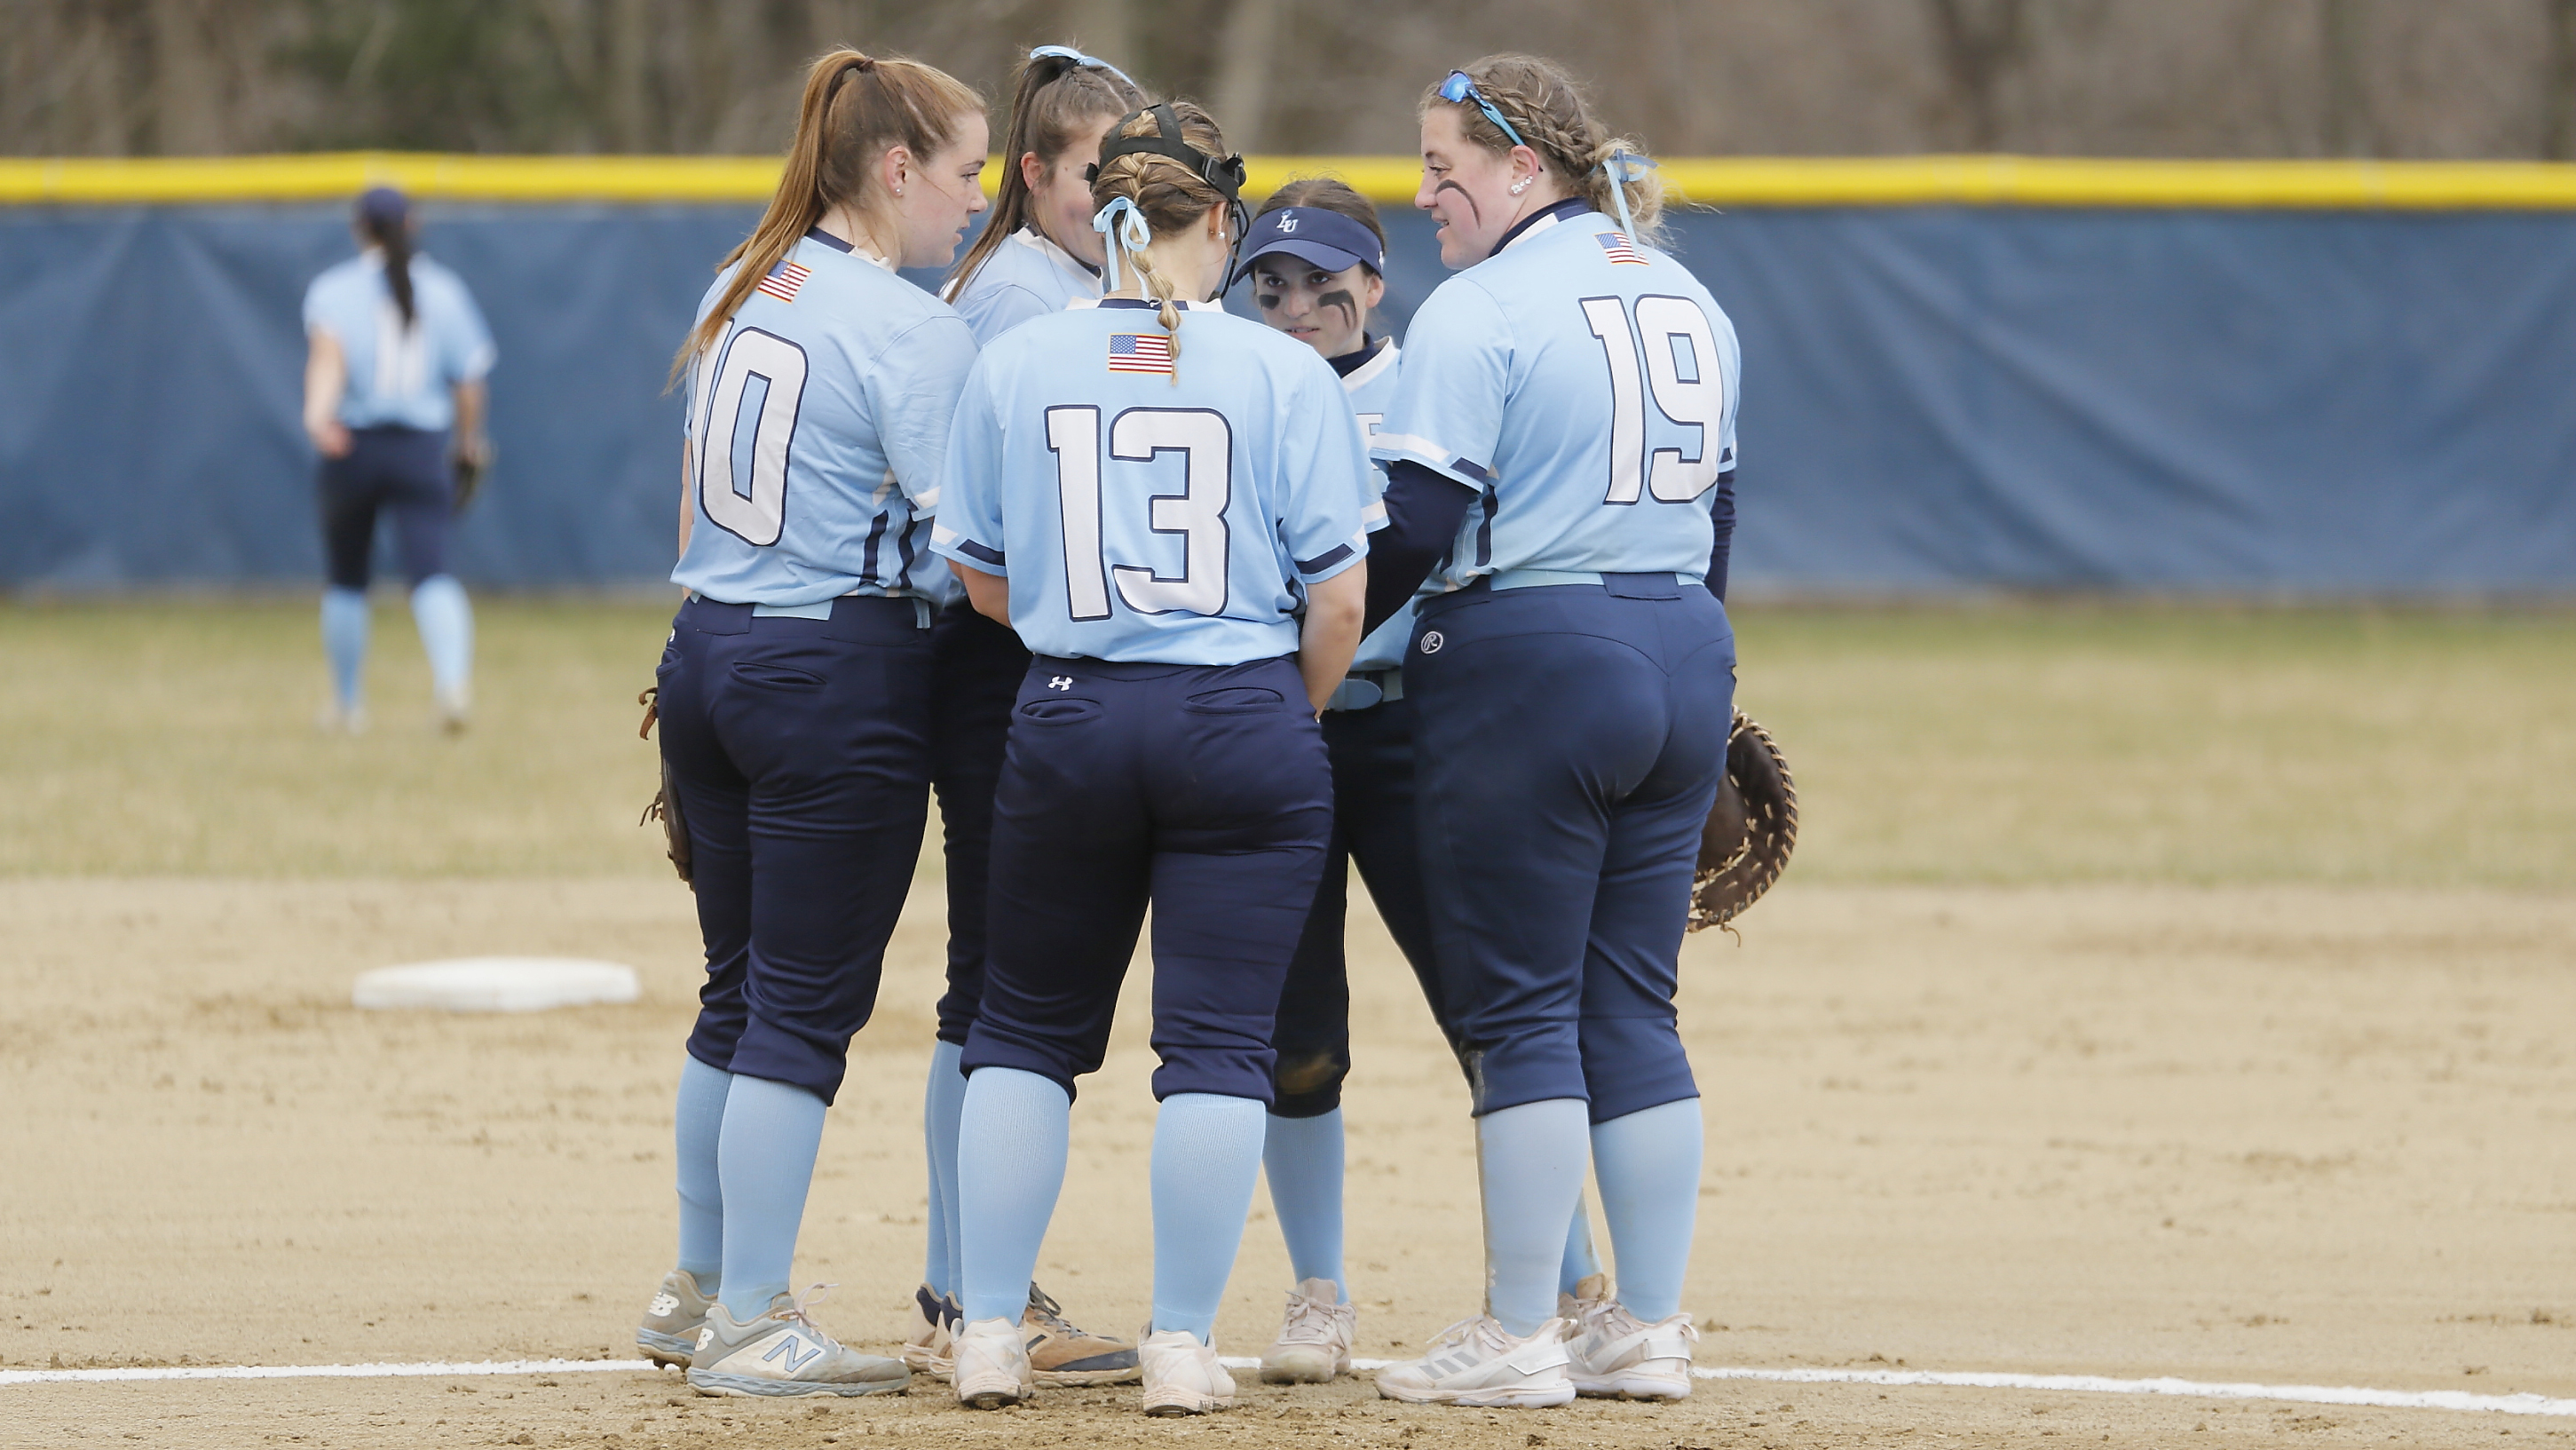 Softball: Lasers fall to Monks in season and conference finale